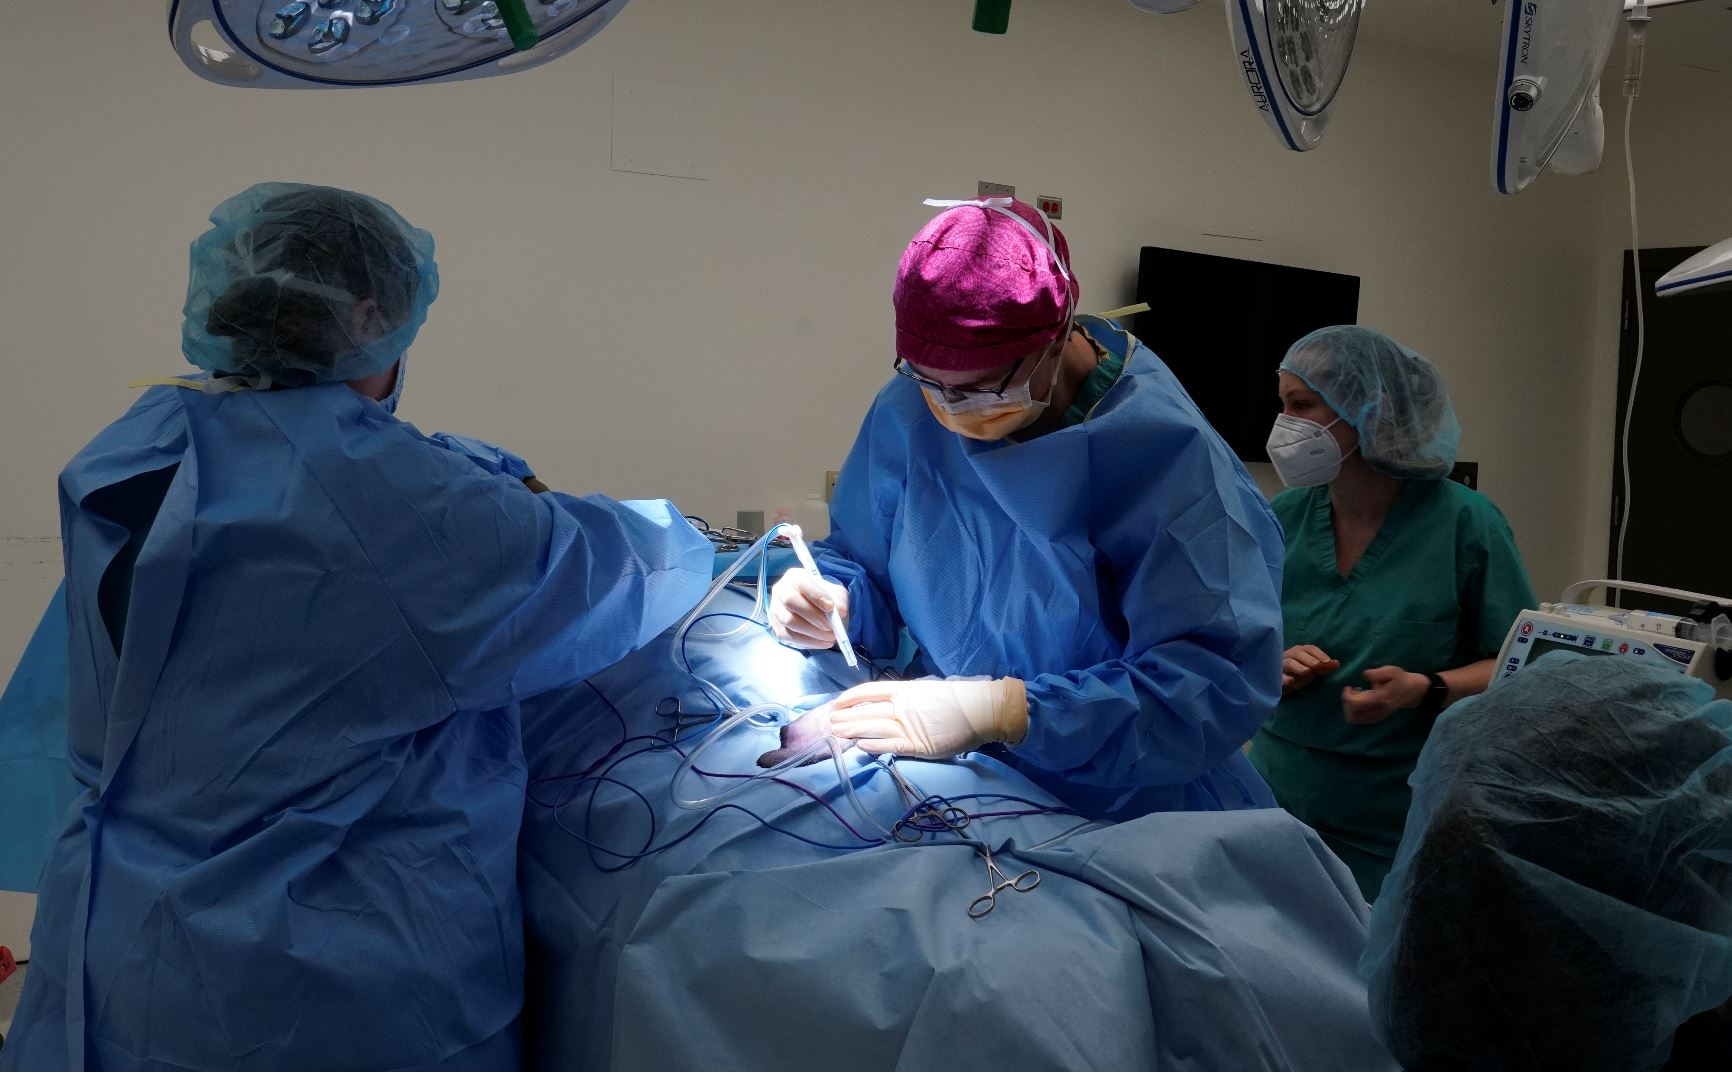 The surgical team performs a laparoscopic surgery